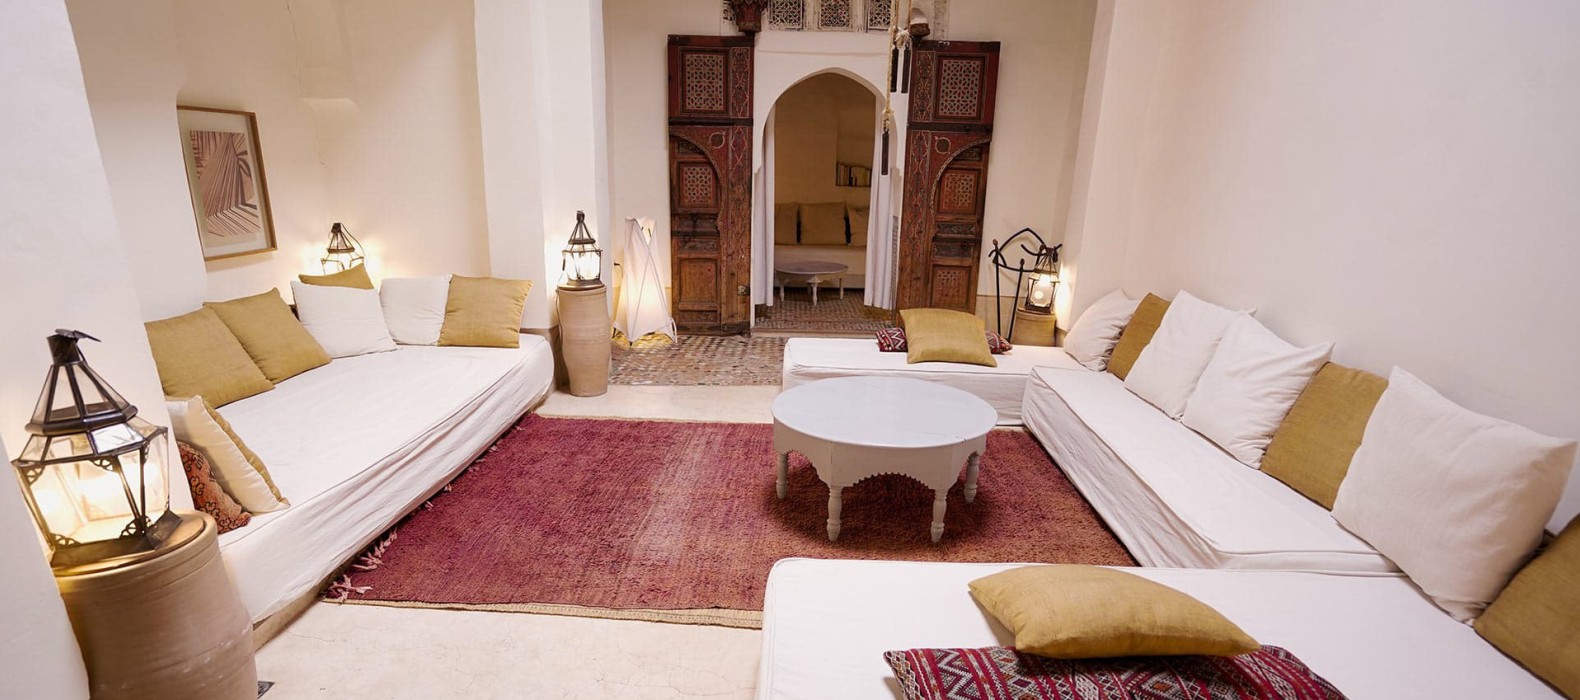 Living room view of Riad Knizou in Marrakech